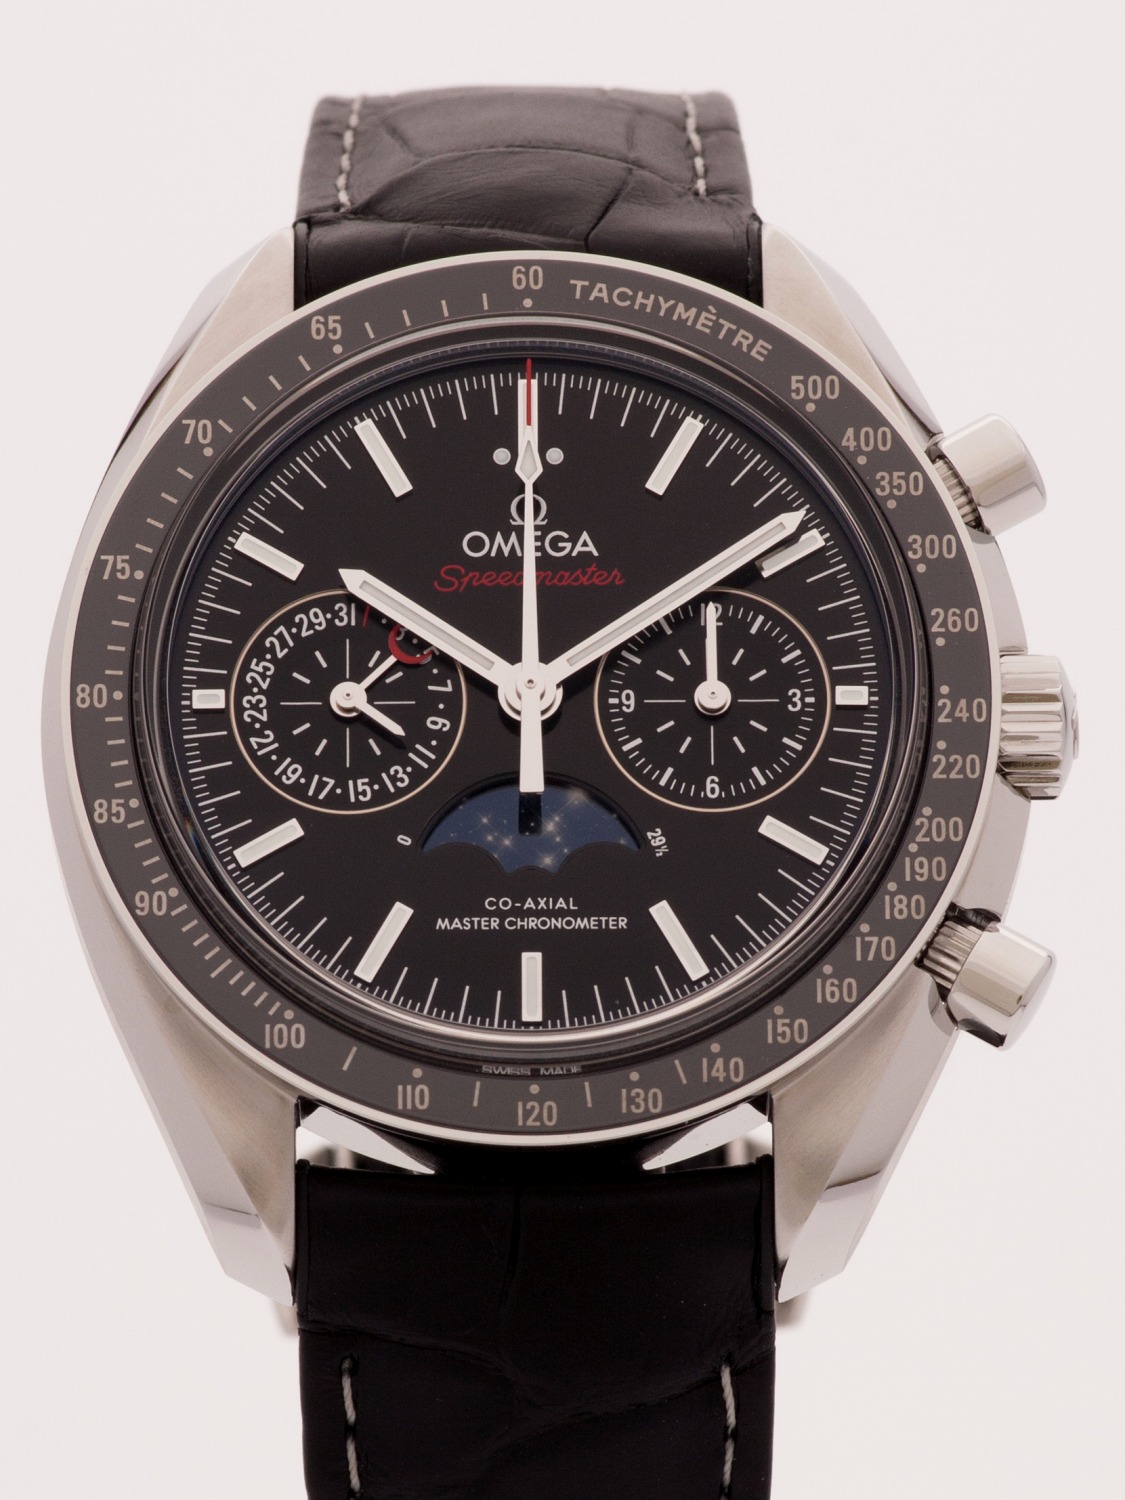 Omega Speedmaster Moonwatch Co-Axial Master Chronometer Moonphase Chronograph watch, silver